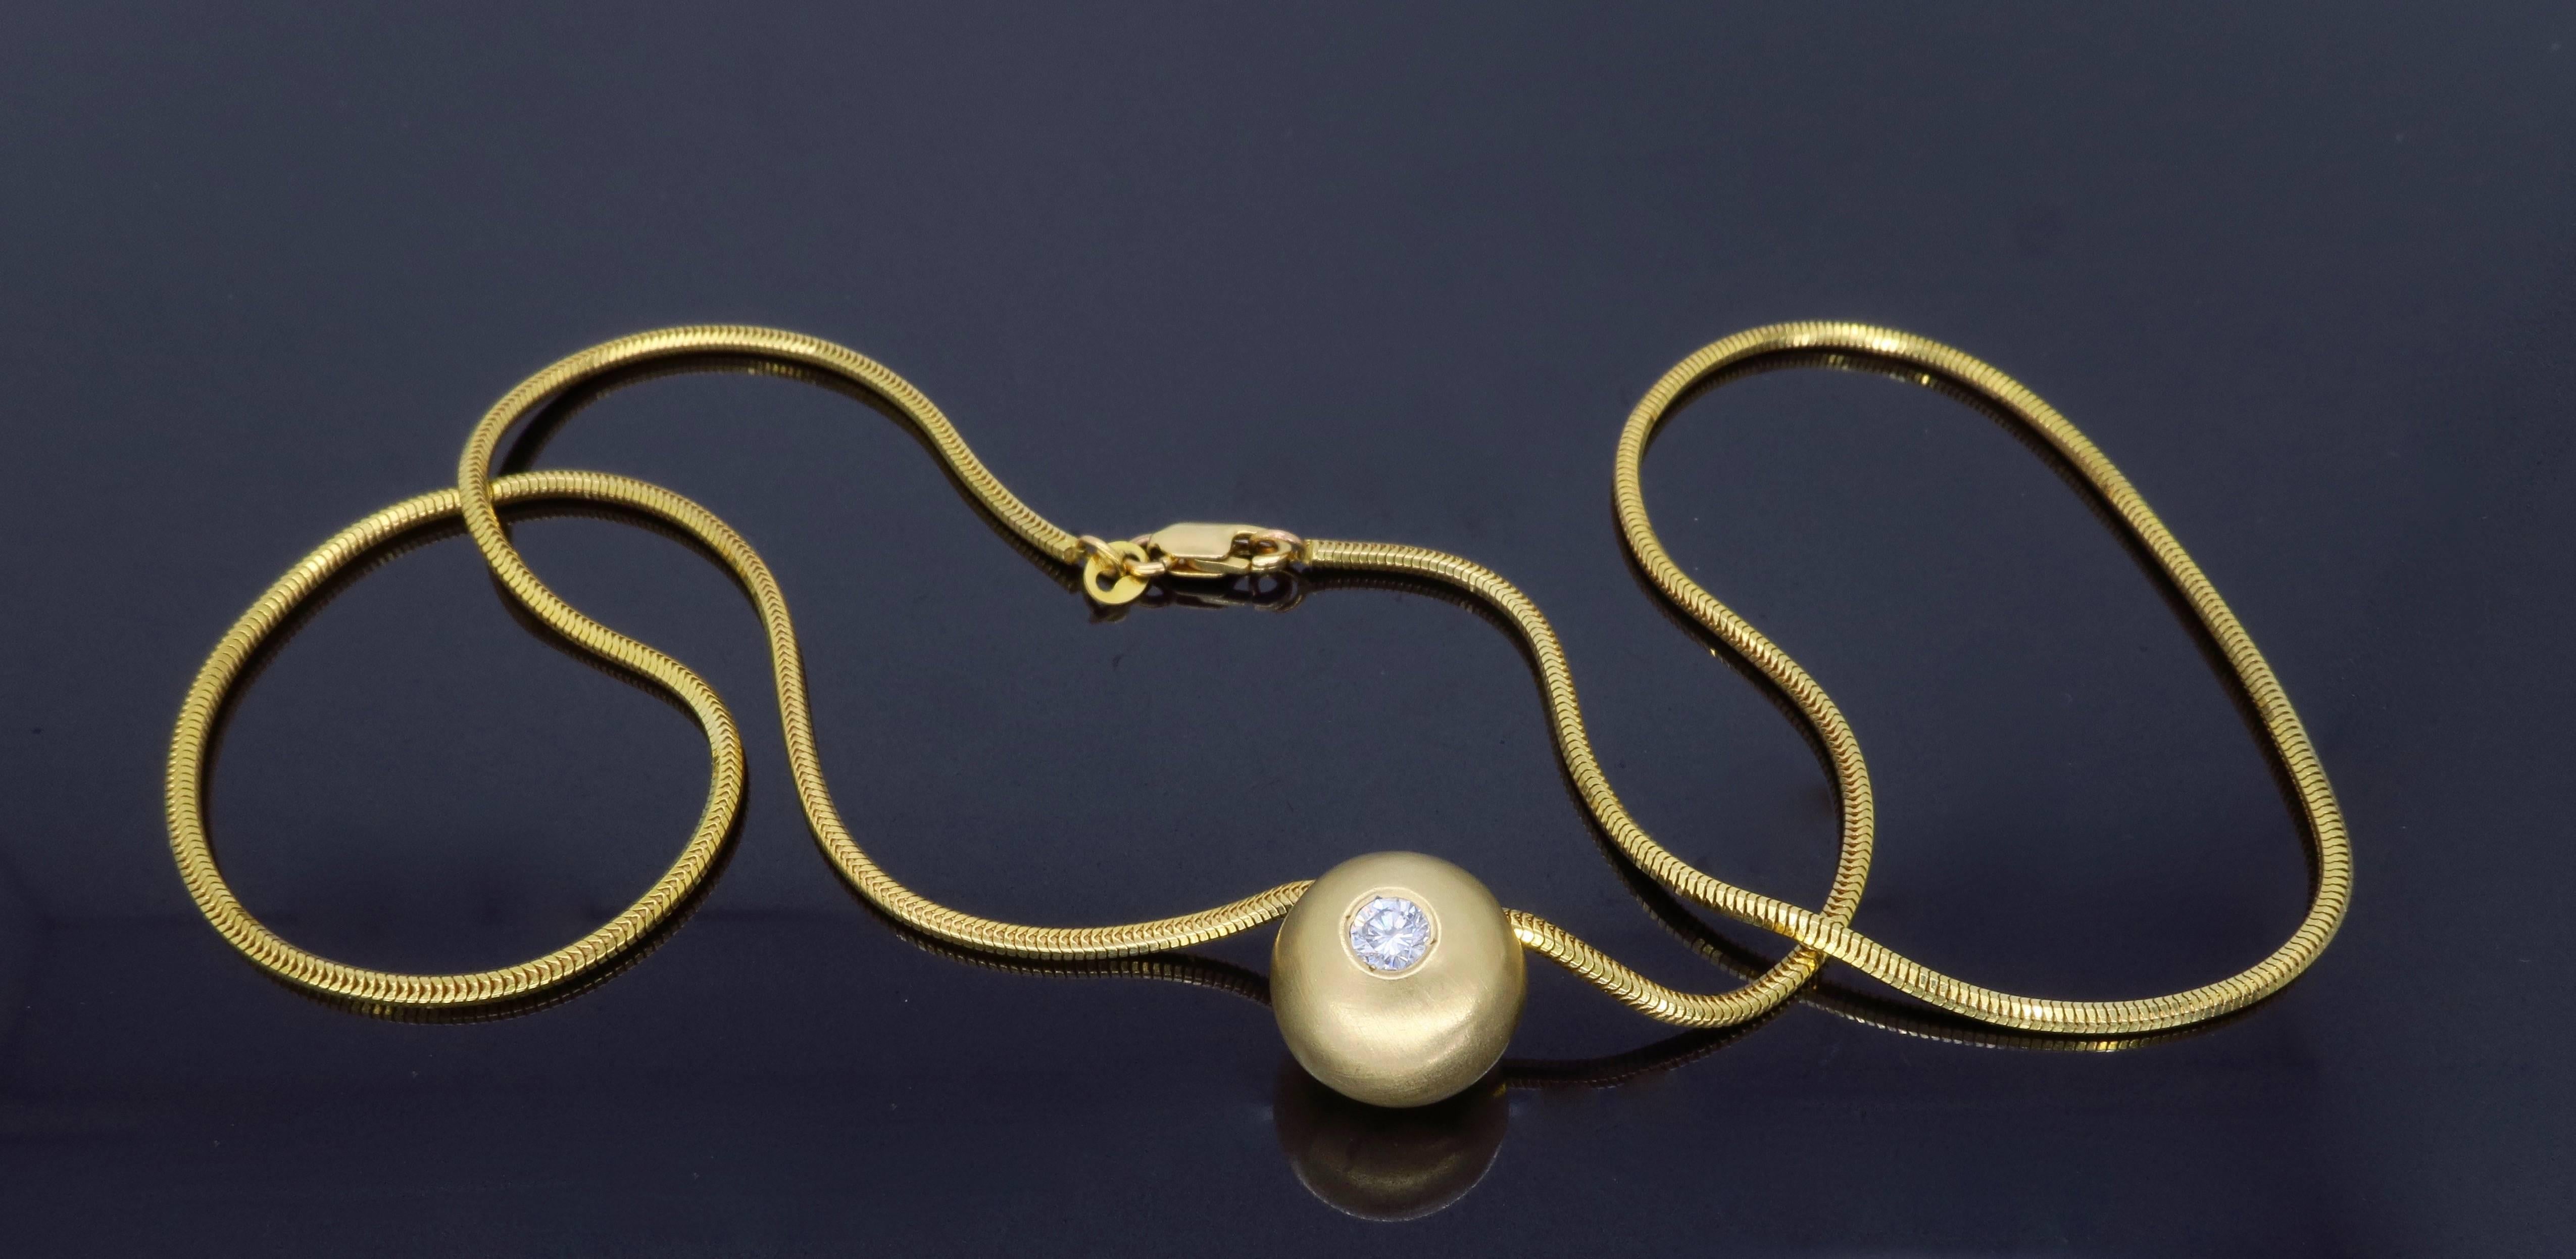 Unique matte finished ball pendant features an approximate .25CT Round Brilliant Cut Diamond set in a 14K yellow gold. The featured diamond displays G-H color and VS2 clarity. The 14K yellow gold necklace is 18” in length and weighs 12.1 grams.